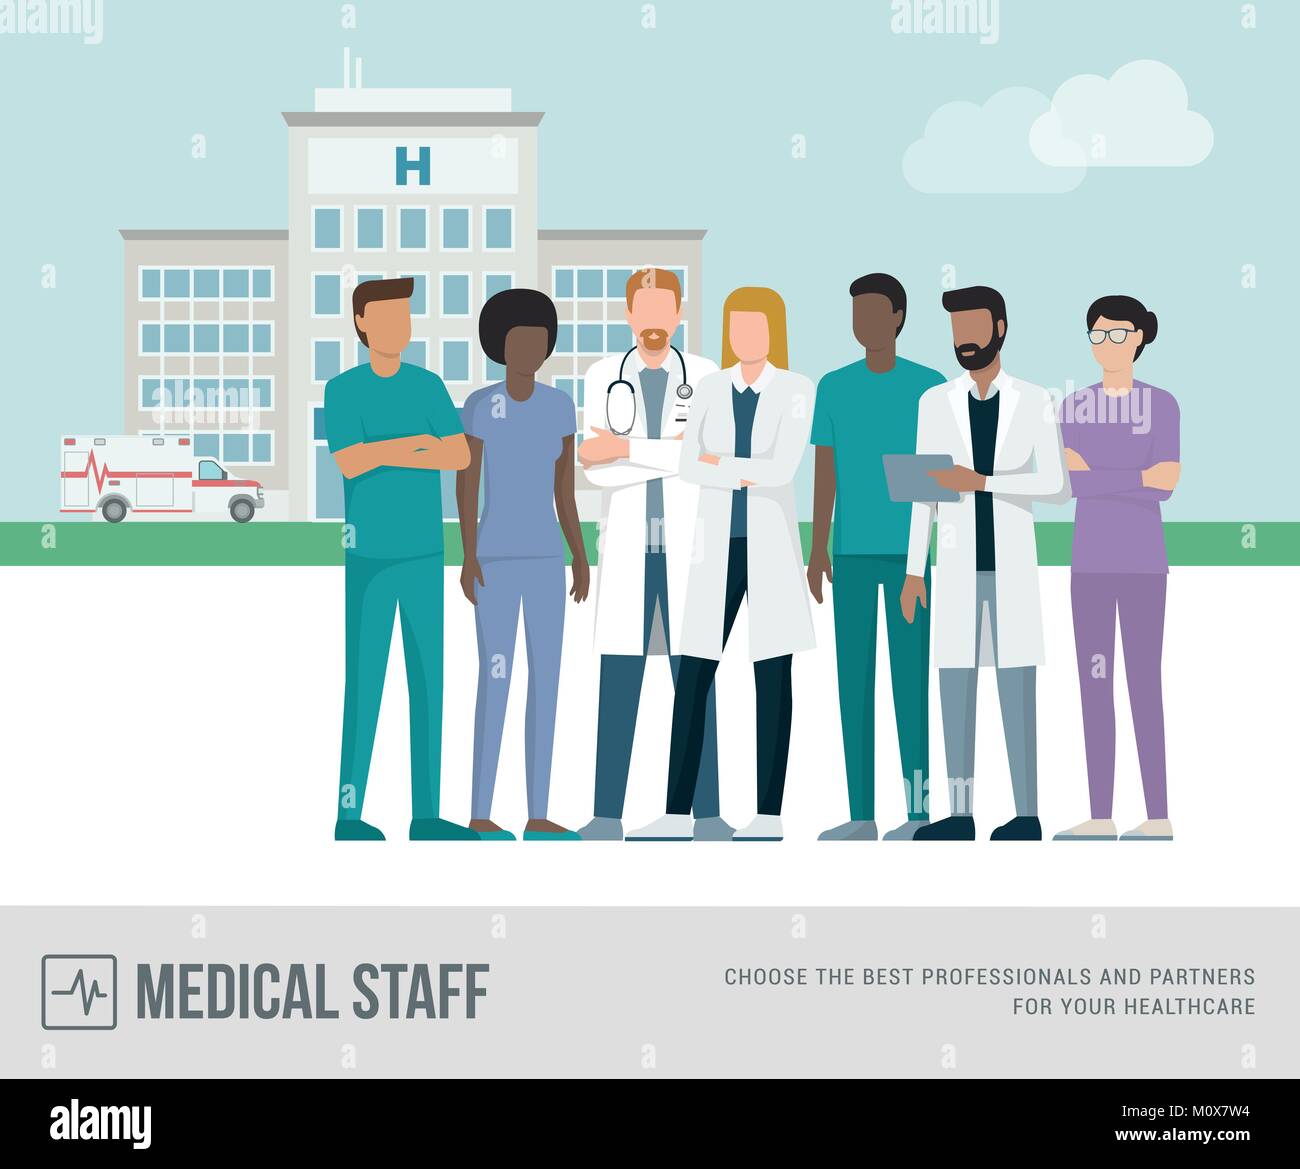 Medical staff standing together: doctors, nurses and surgeons, hospital building and ambulance on the background Stock Vector